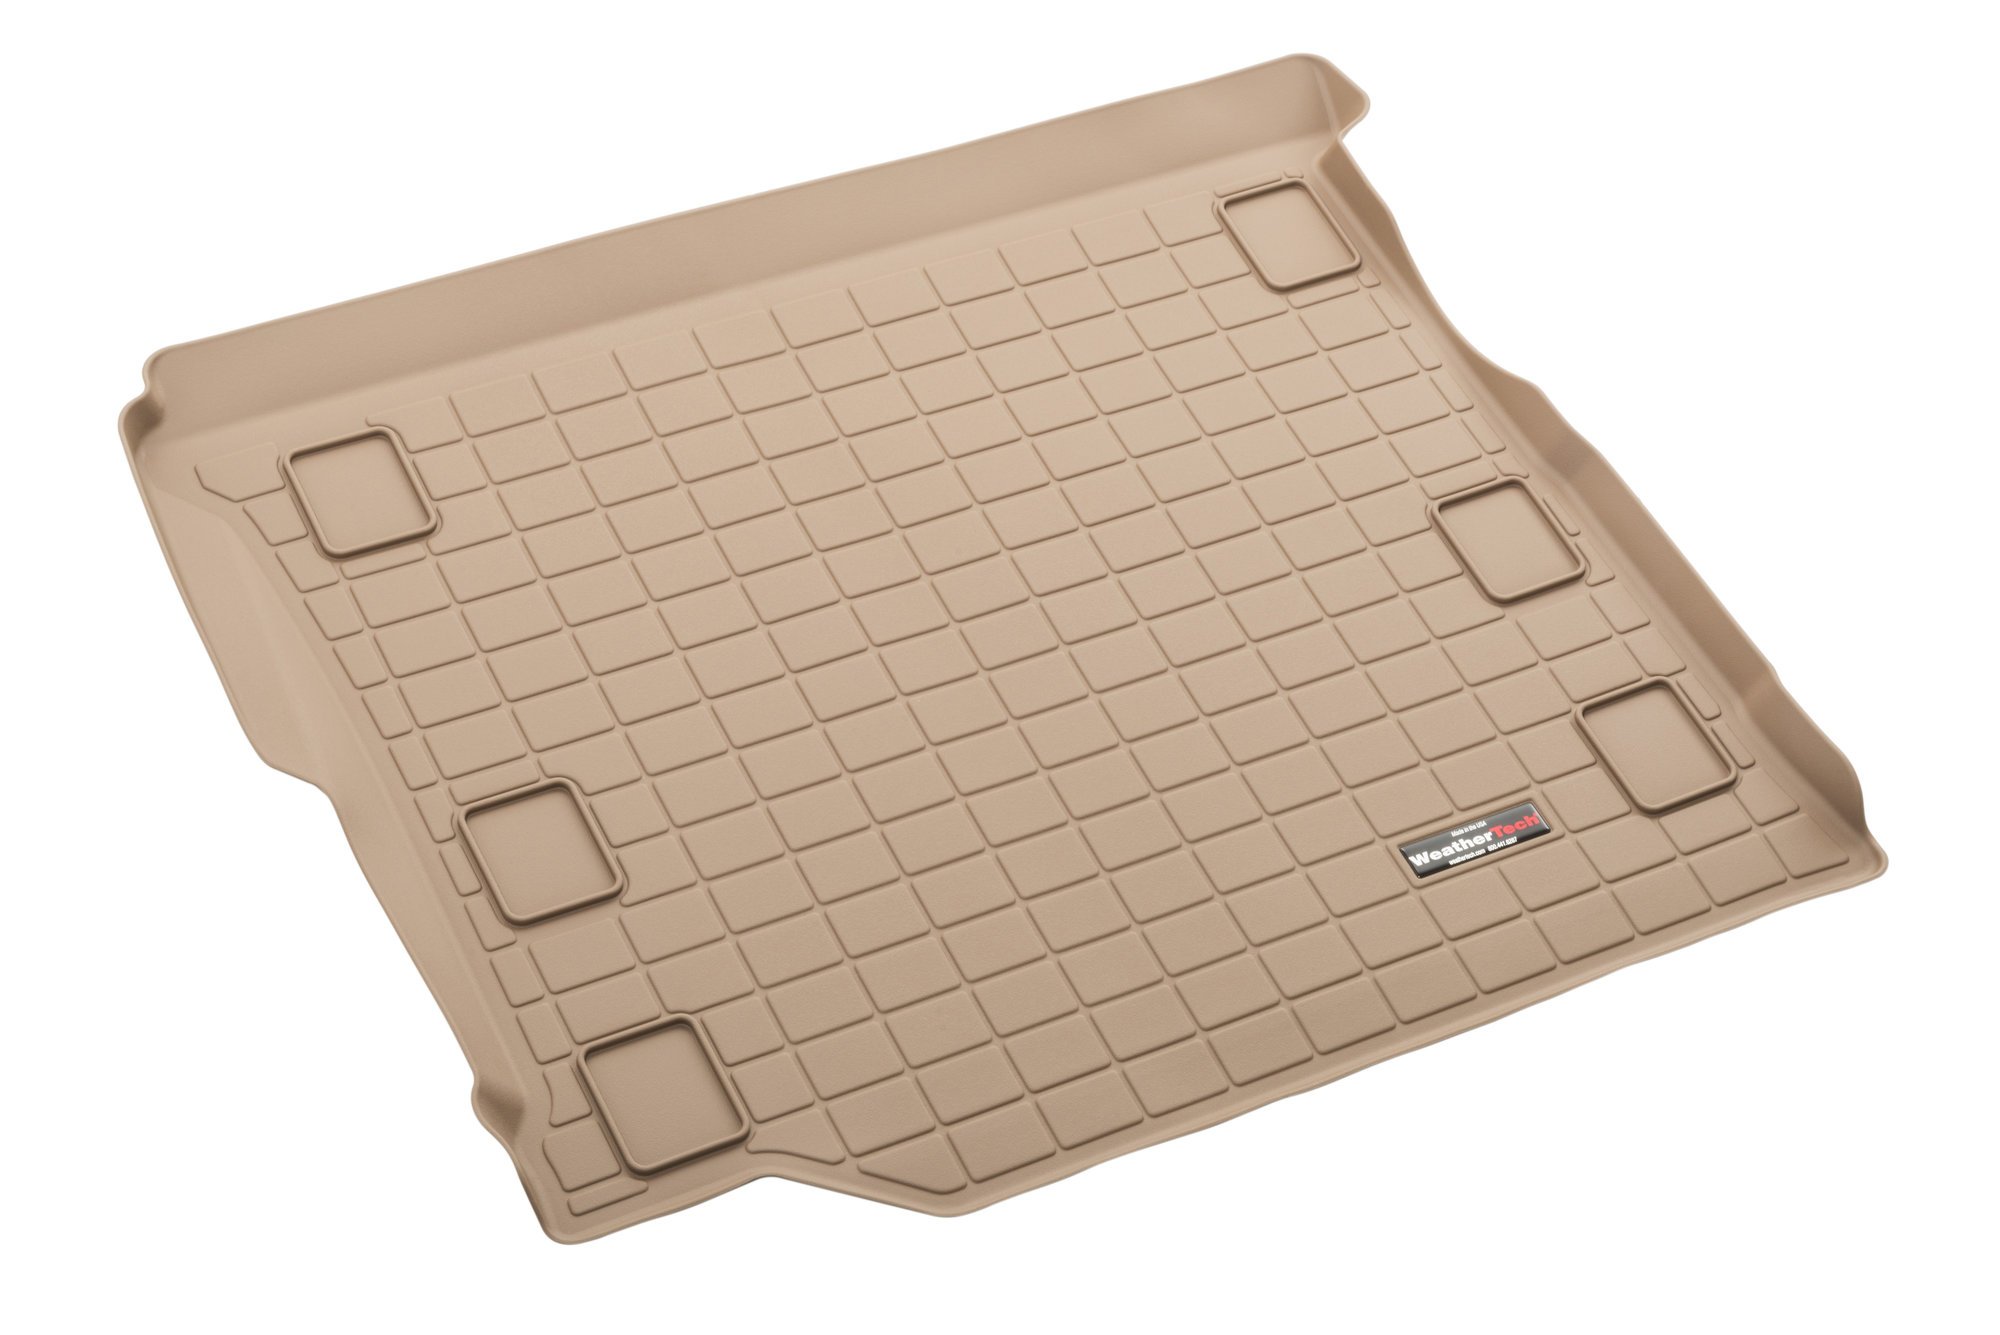 WeatherTech Rear Cargo Liner in Tan for 18-21 Jeep Wrangler JL Unlimited  with Leather Seats Quadratec